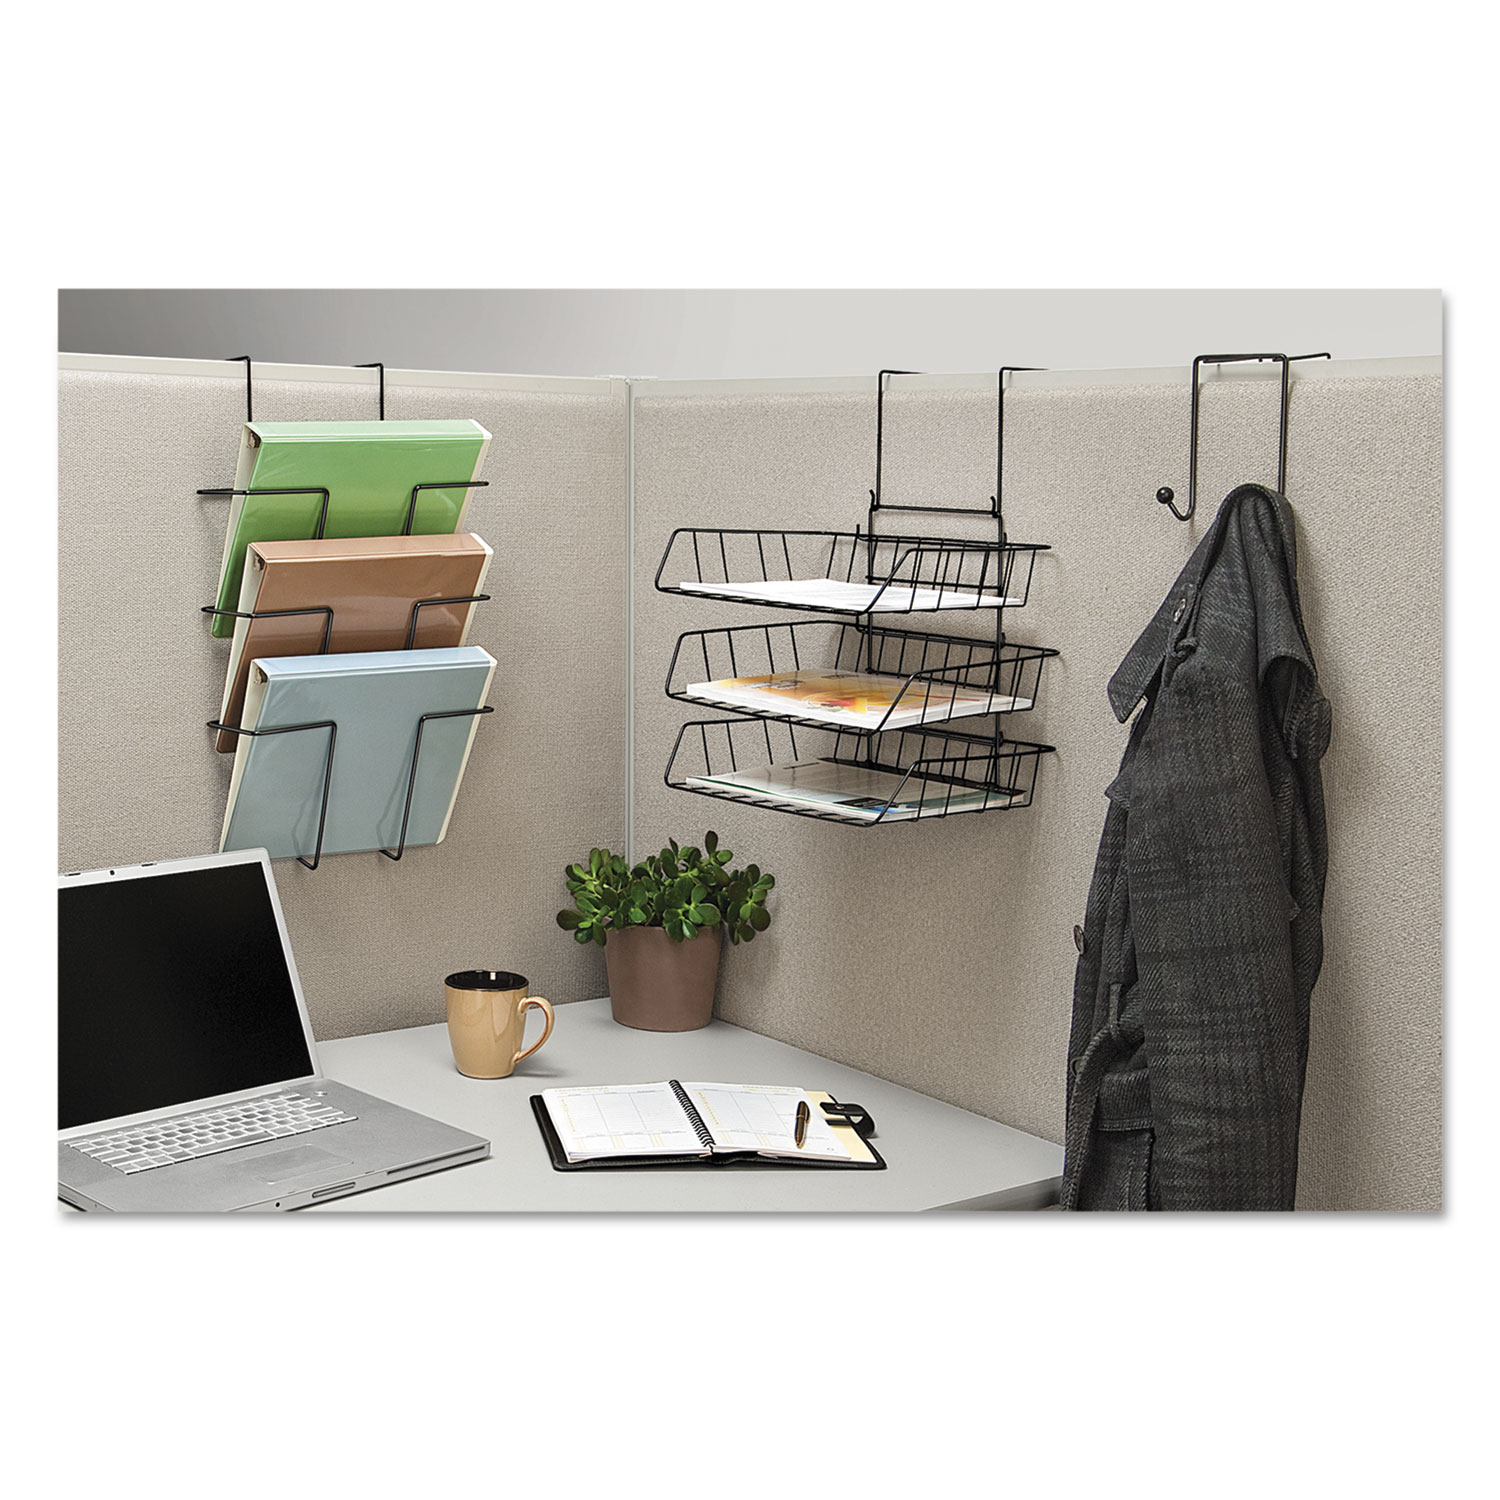 Fellowes Wire Partition Additions Double Coat Hook, Black